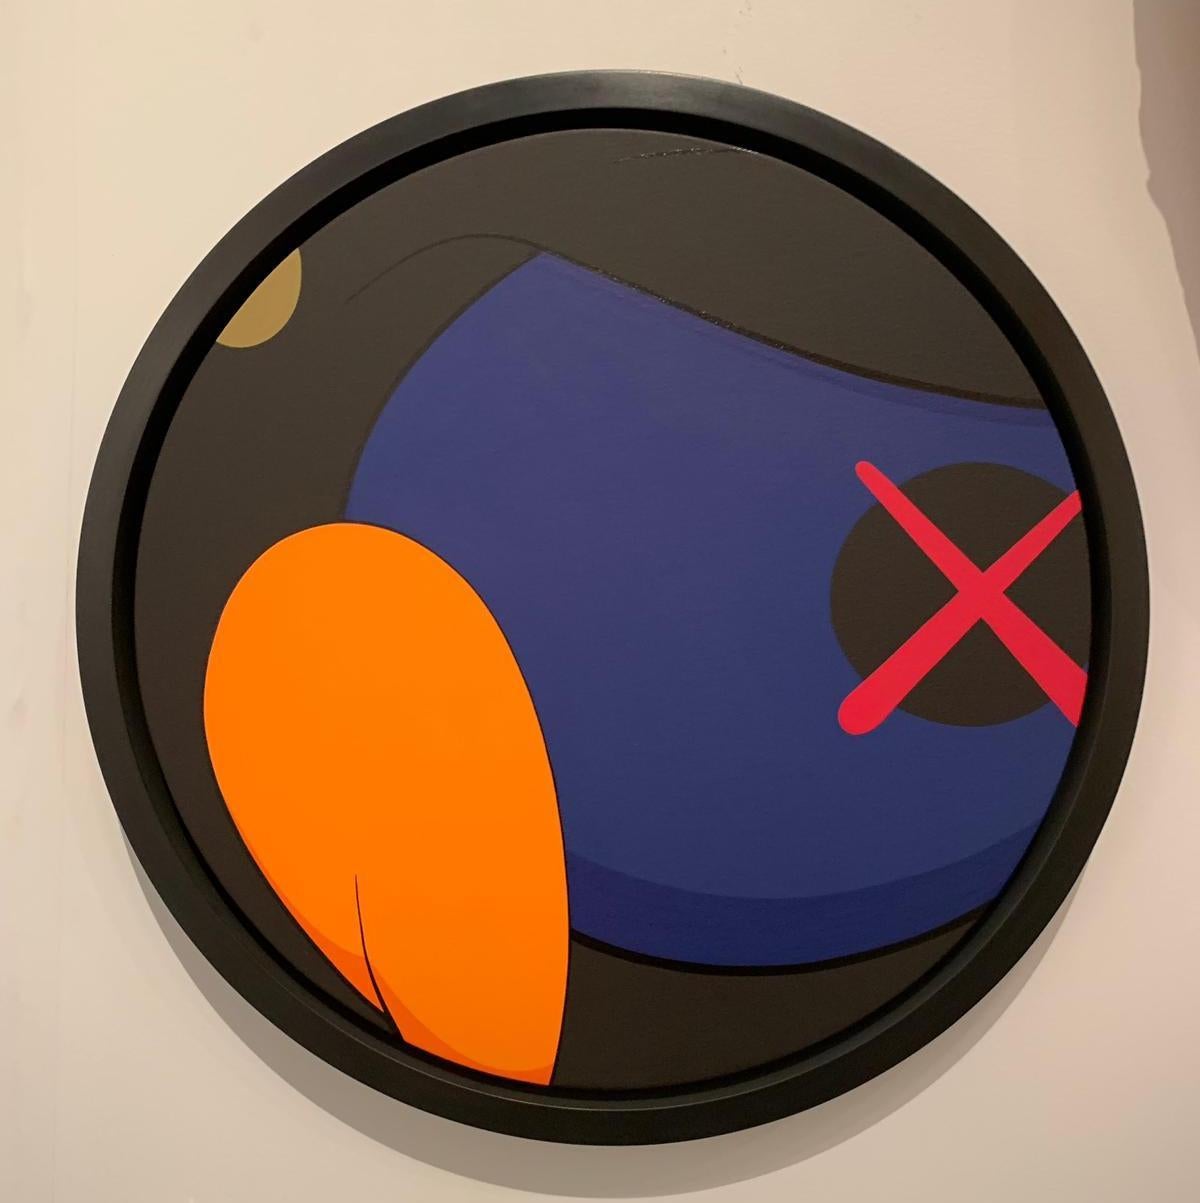 KAWS Abstract Painting - Untitled